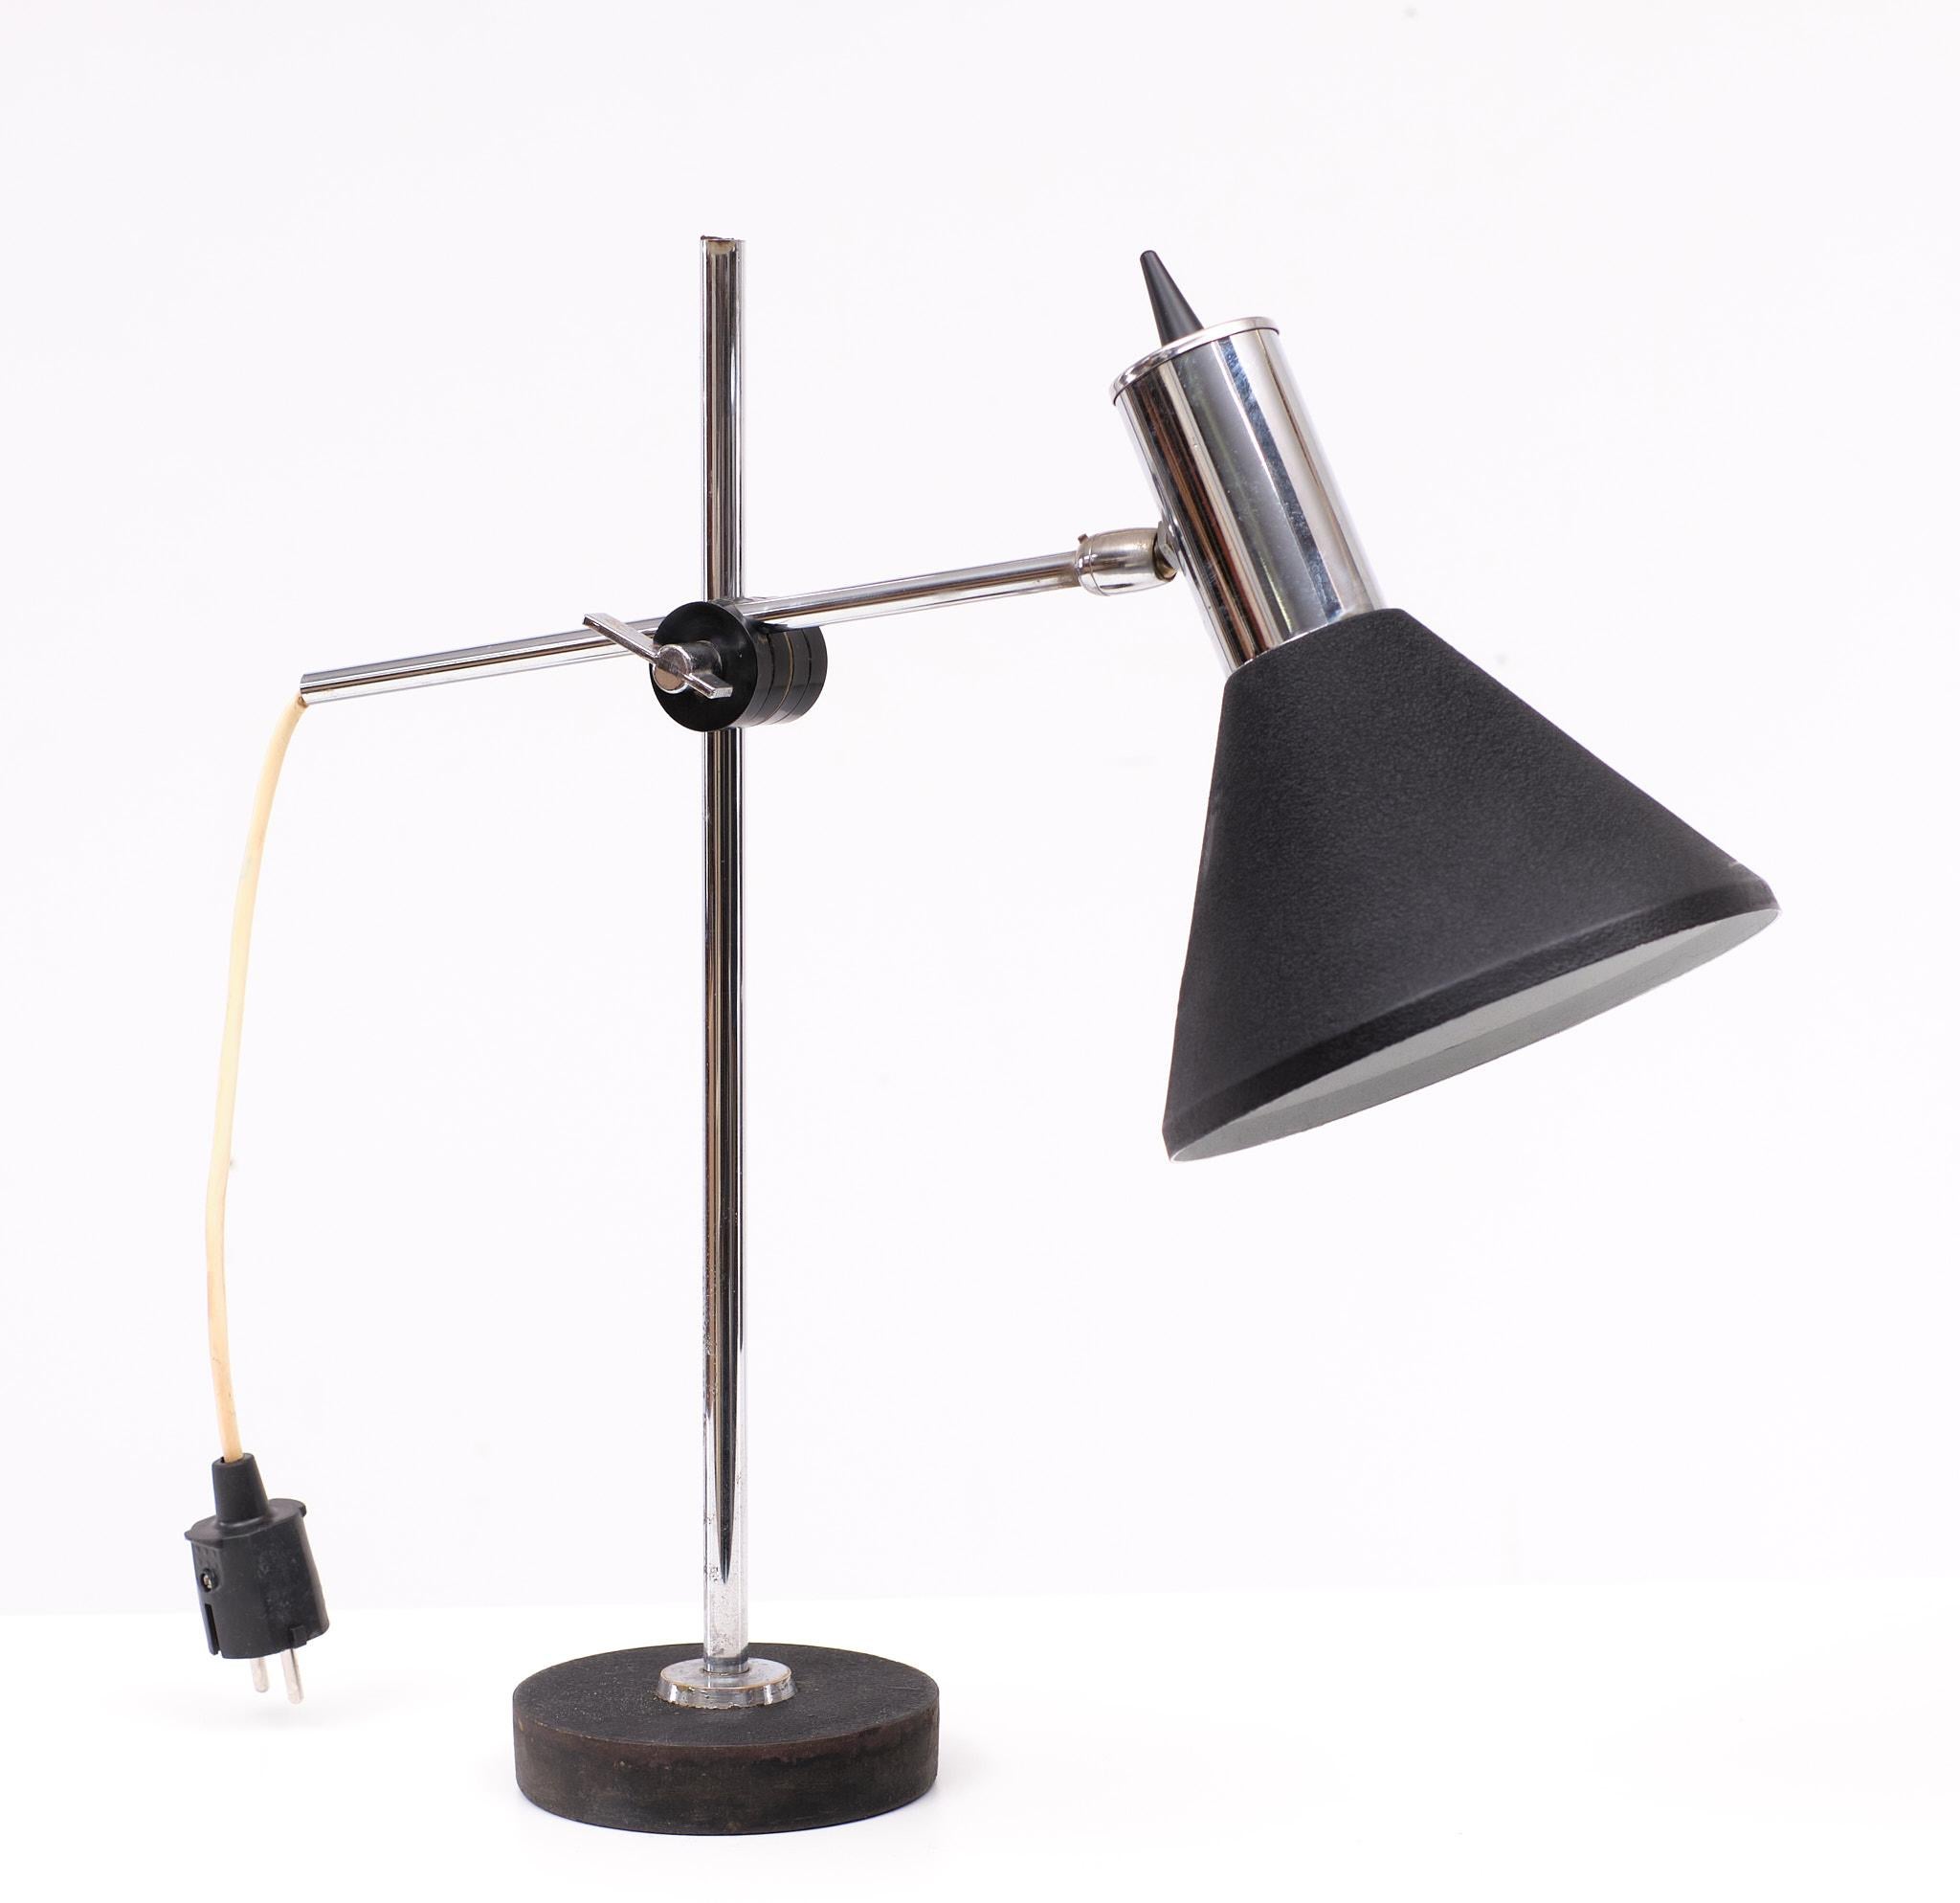 Herda desk lamp. Black Metal shade, Chrome upright. Adjustable in any 
direction. 1 large E27 bulb needed. Good vintage condition.